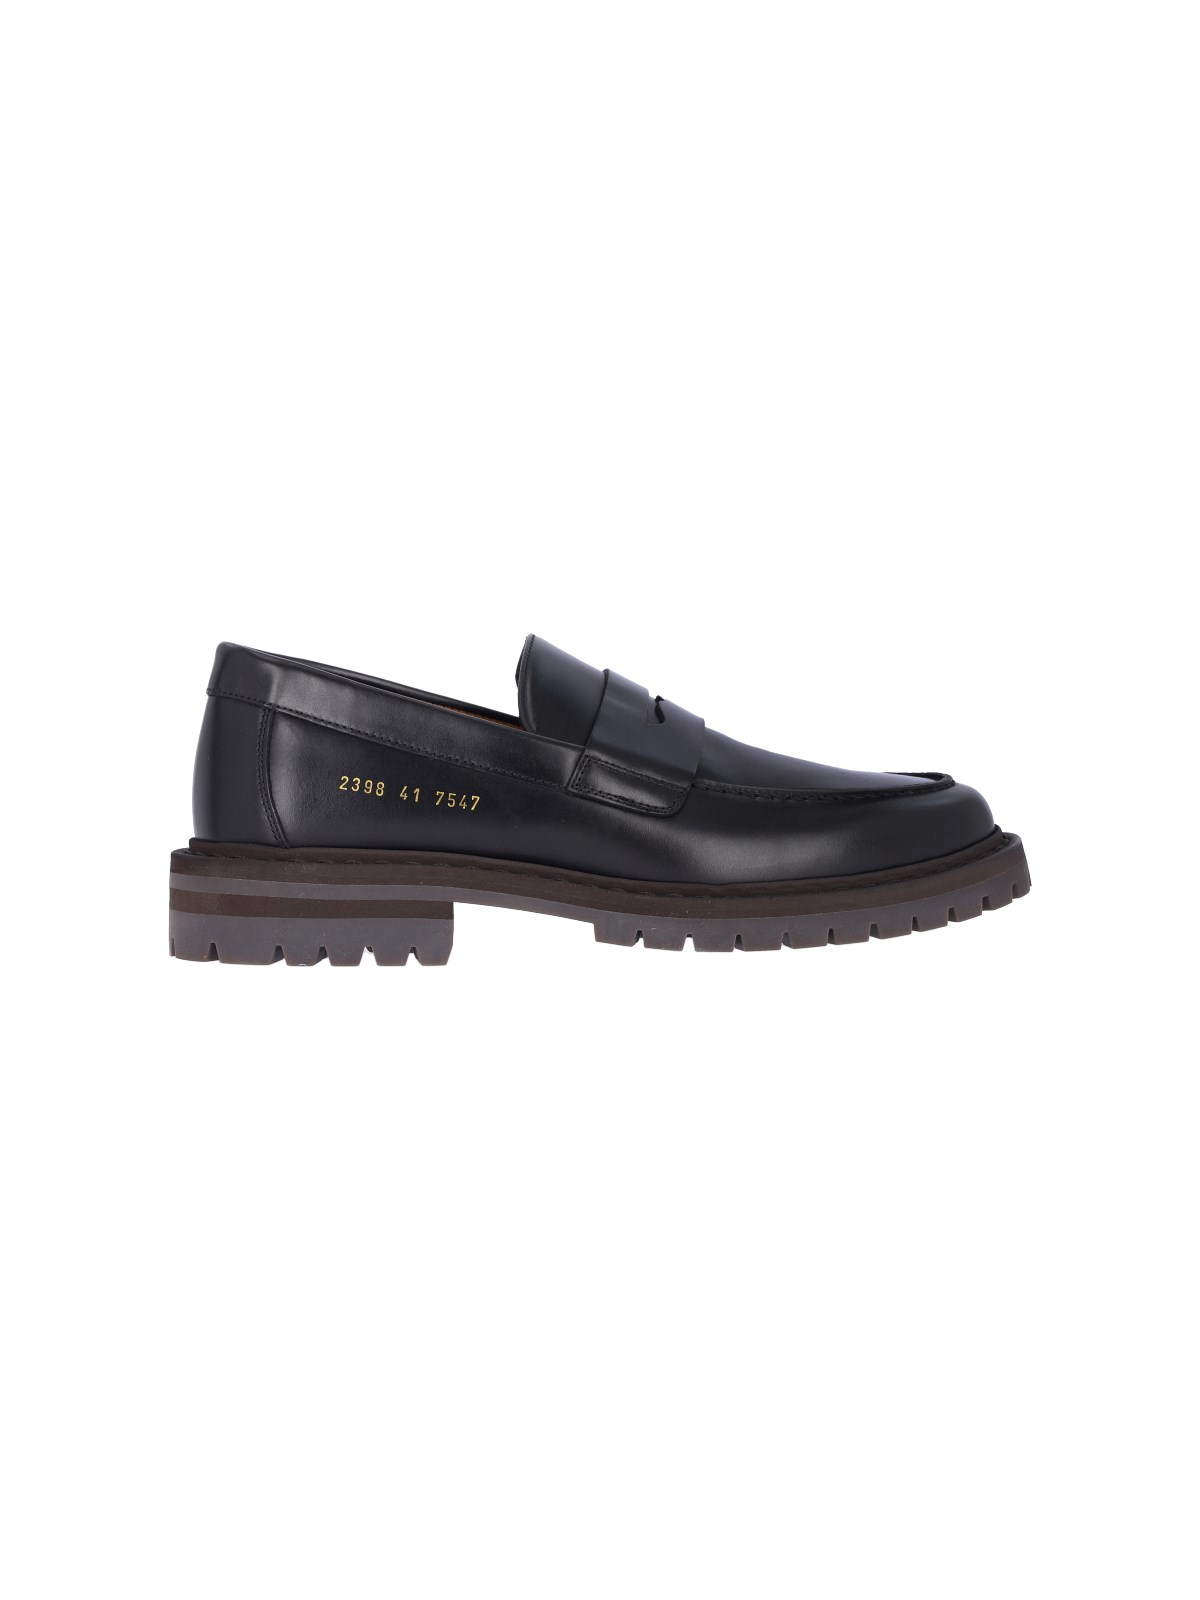 COMMON PROJECTS Loafers for Men | ModeSens